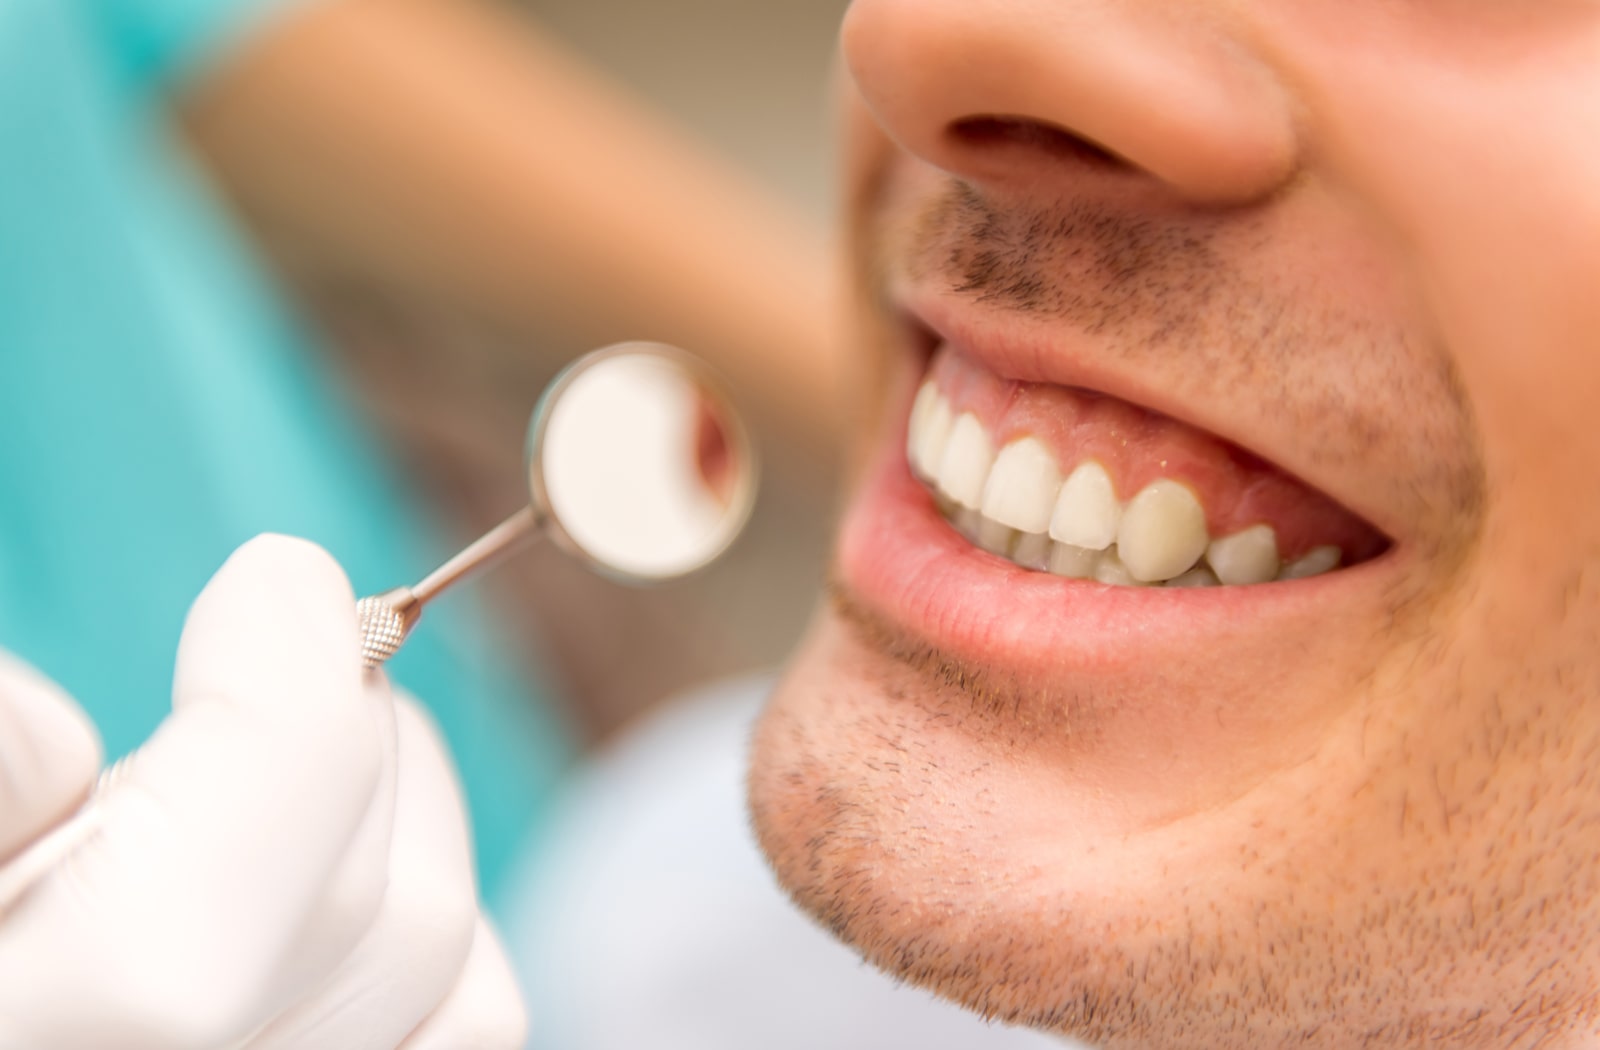 An image of a man's teeth while a dentist looks at them with a mouth mirror